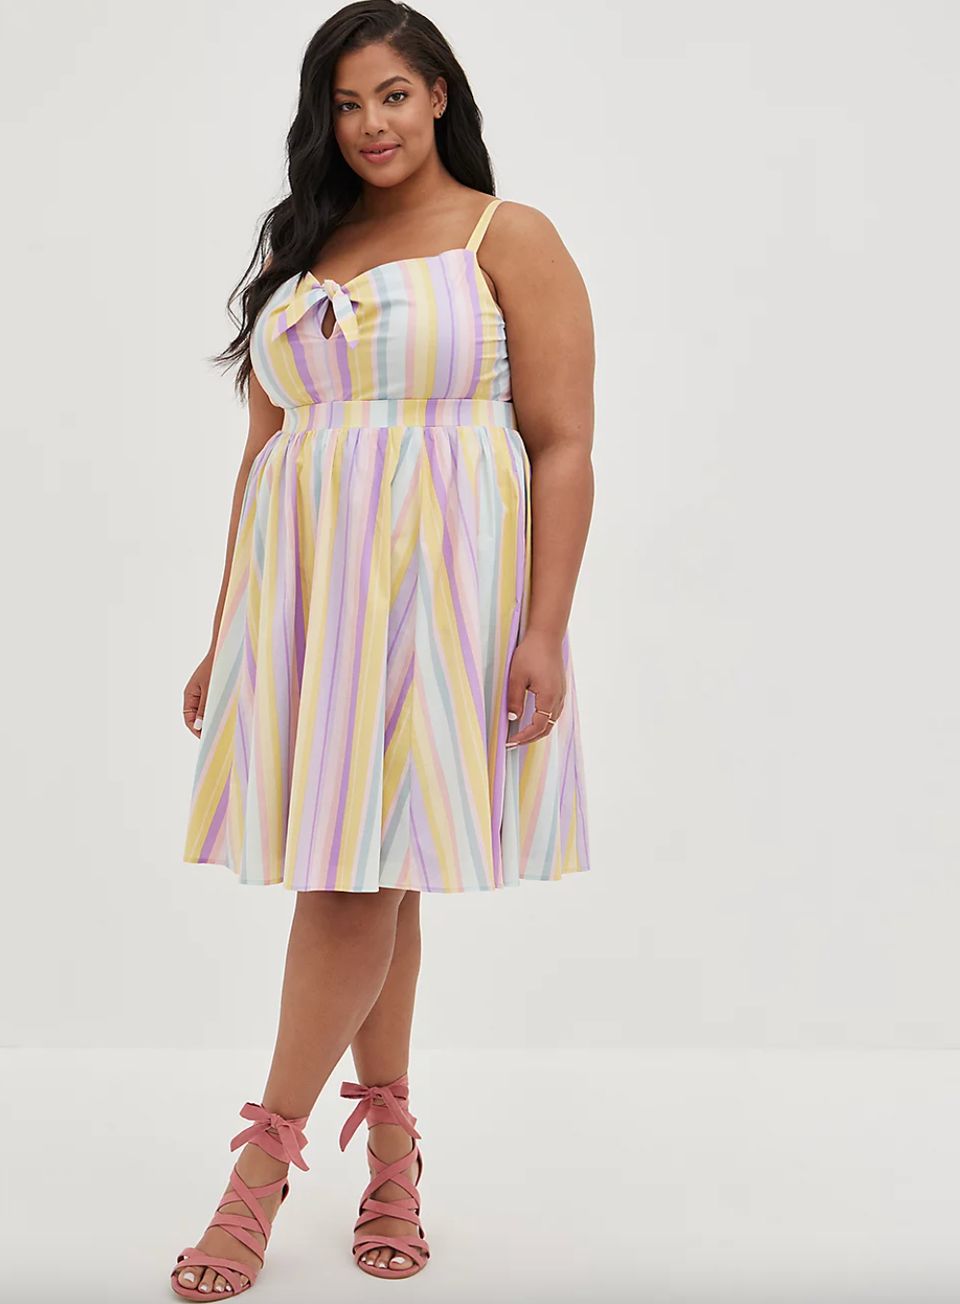 31 Dresses That'll Become Your Designated Summer Outfit | HuffPost Life